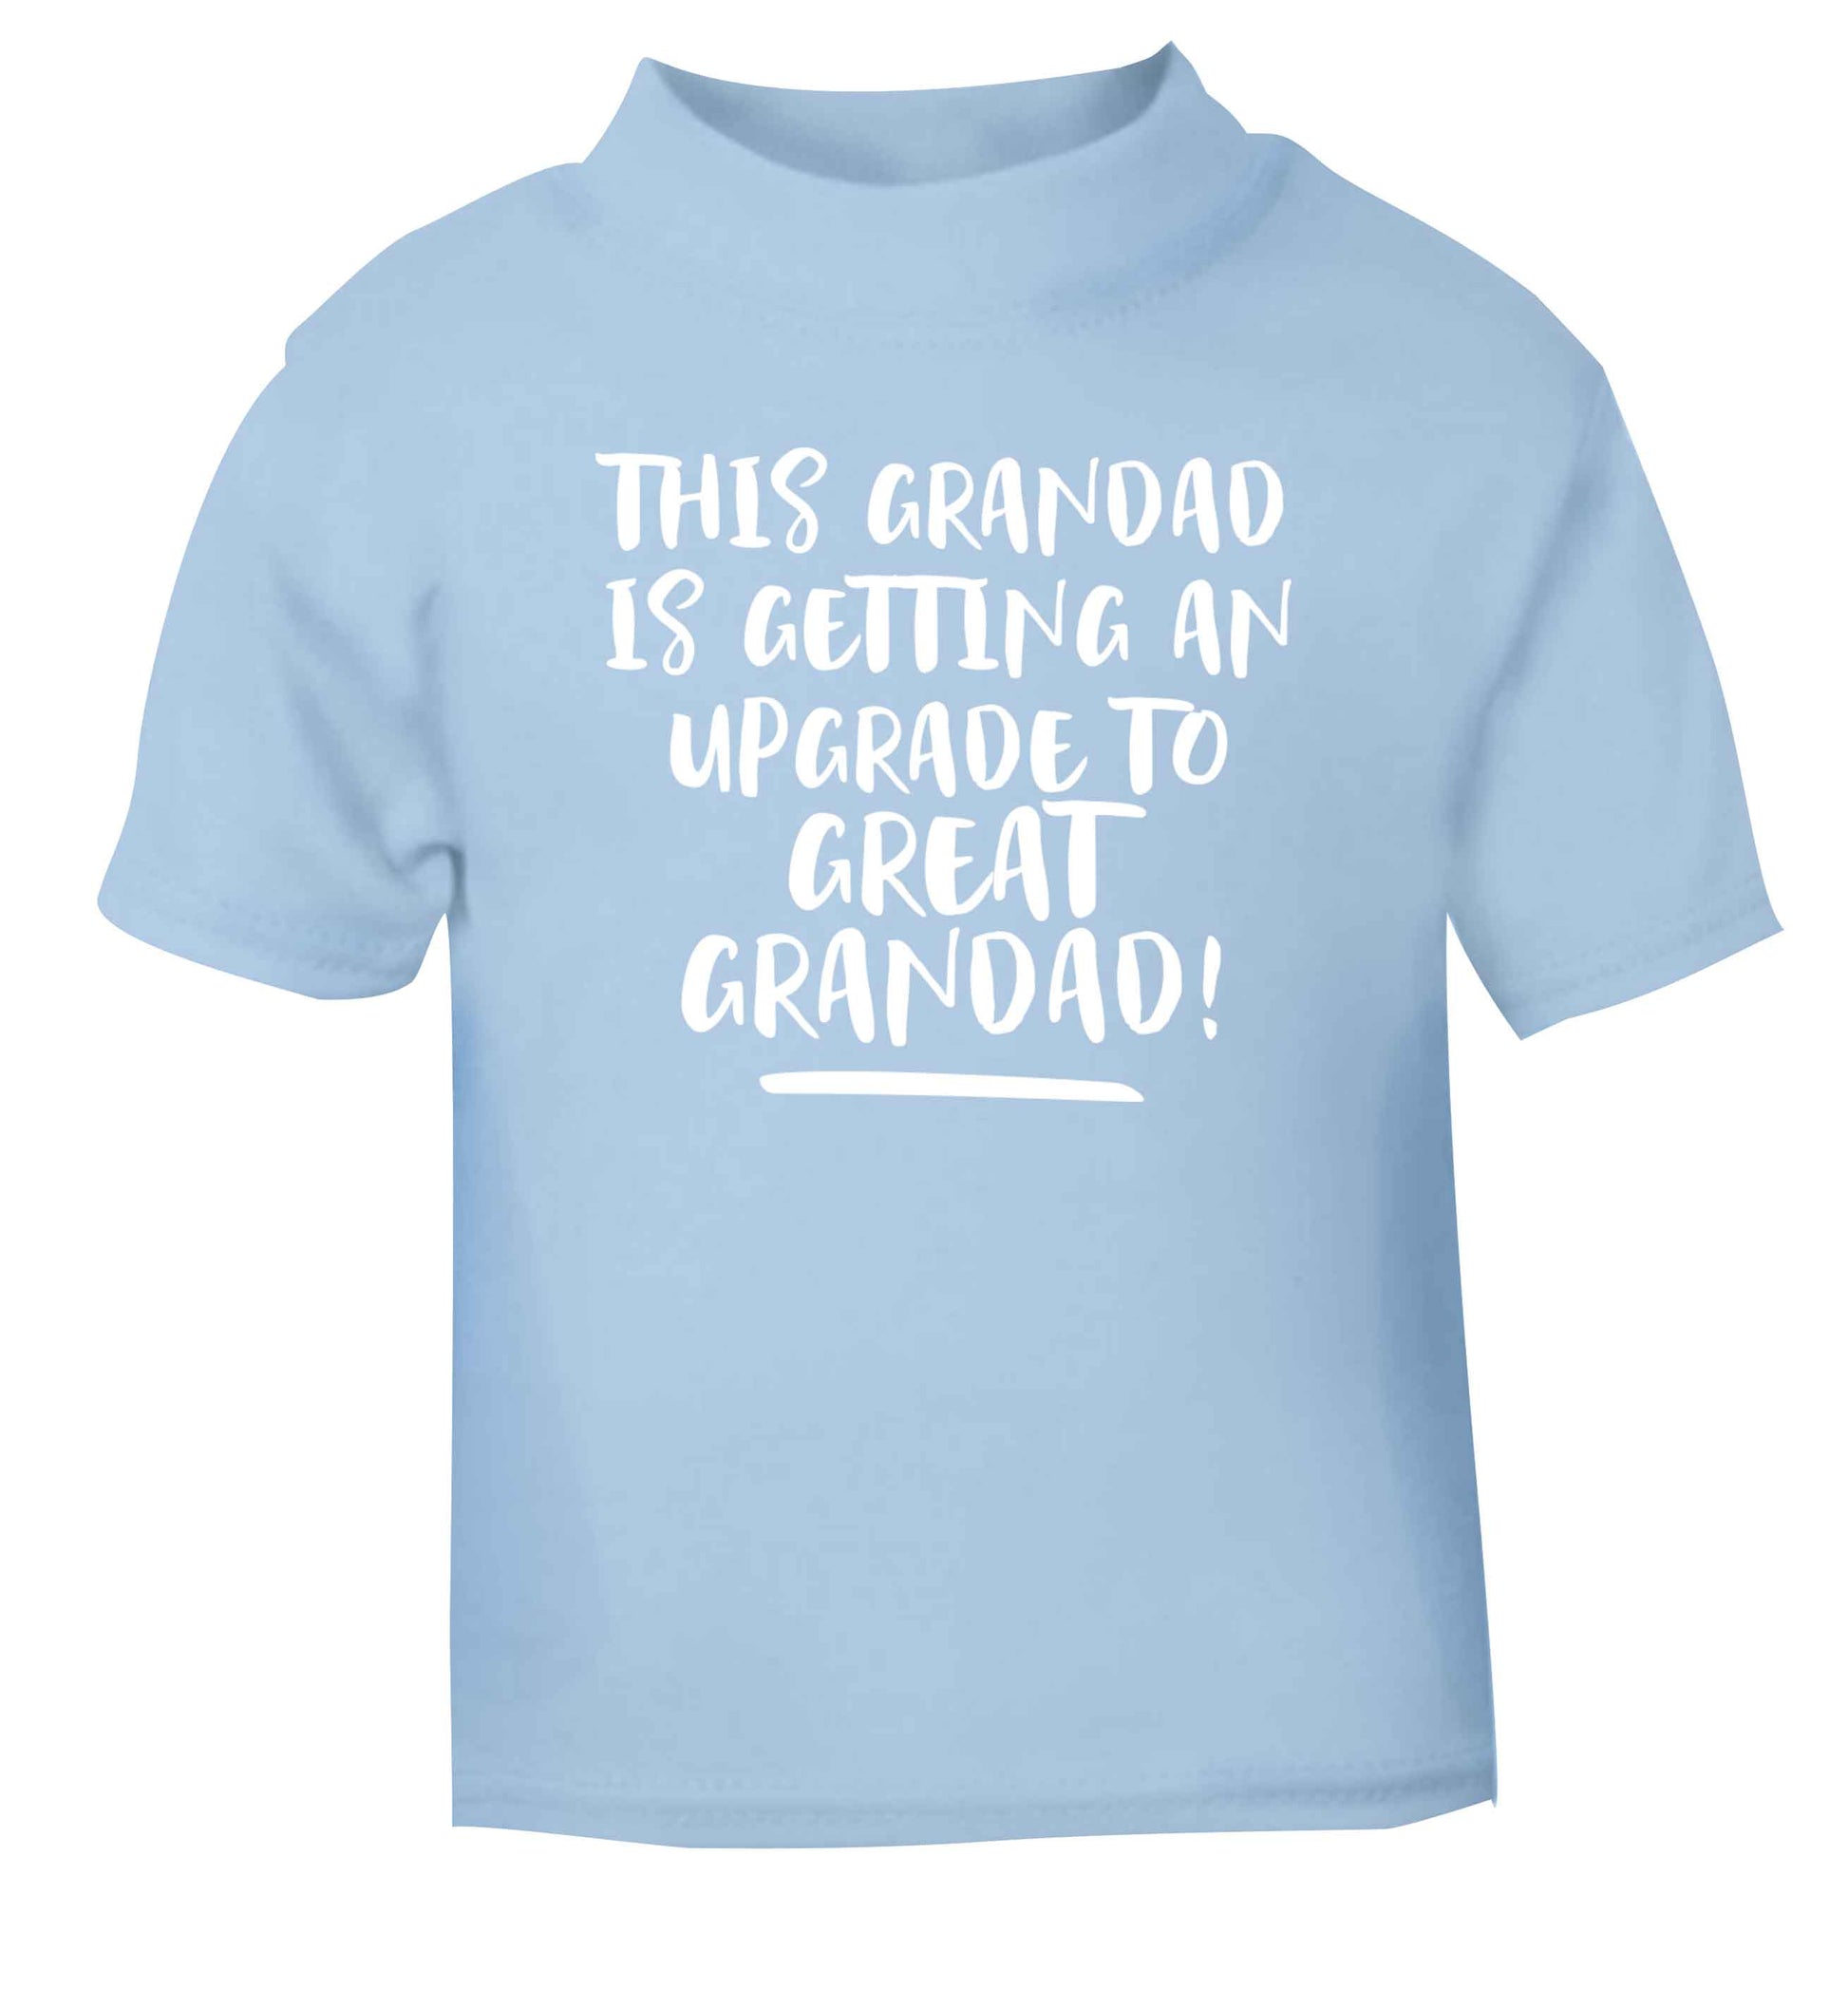 This grandad is getting an upgrade to great grandad! light blue Baby Toddler Tshirt 2 Years